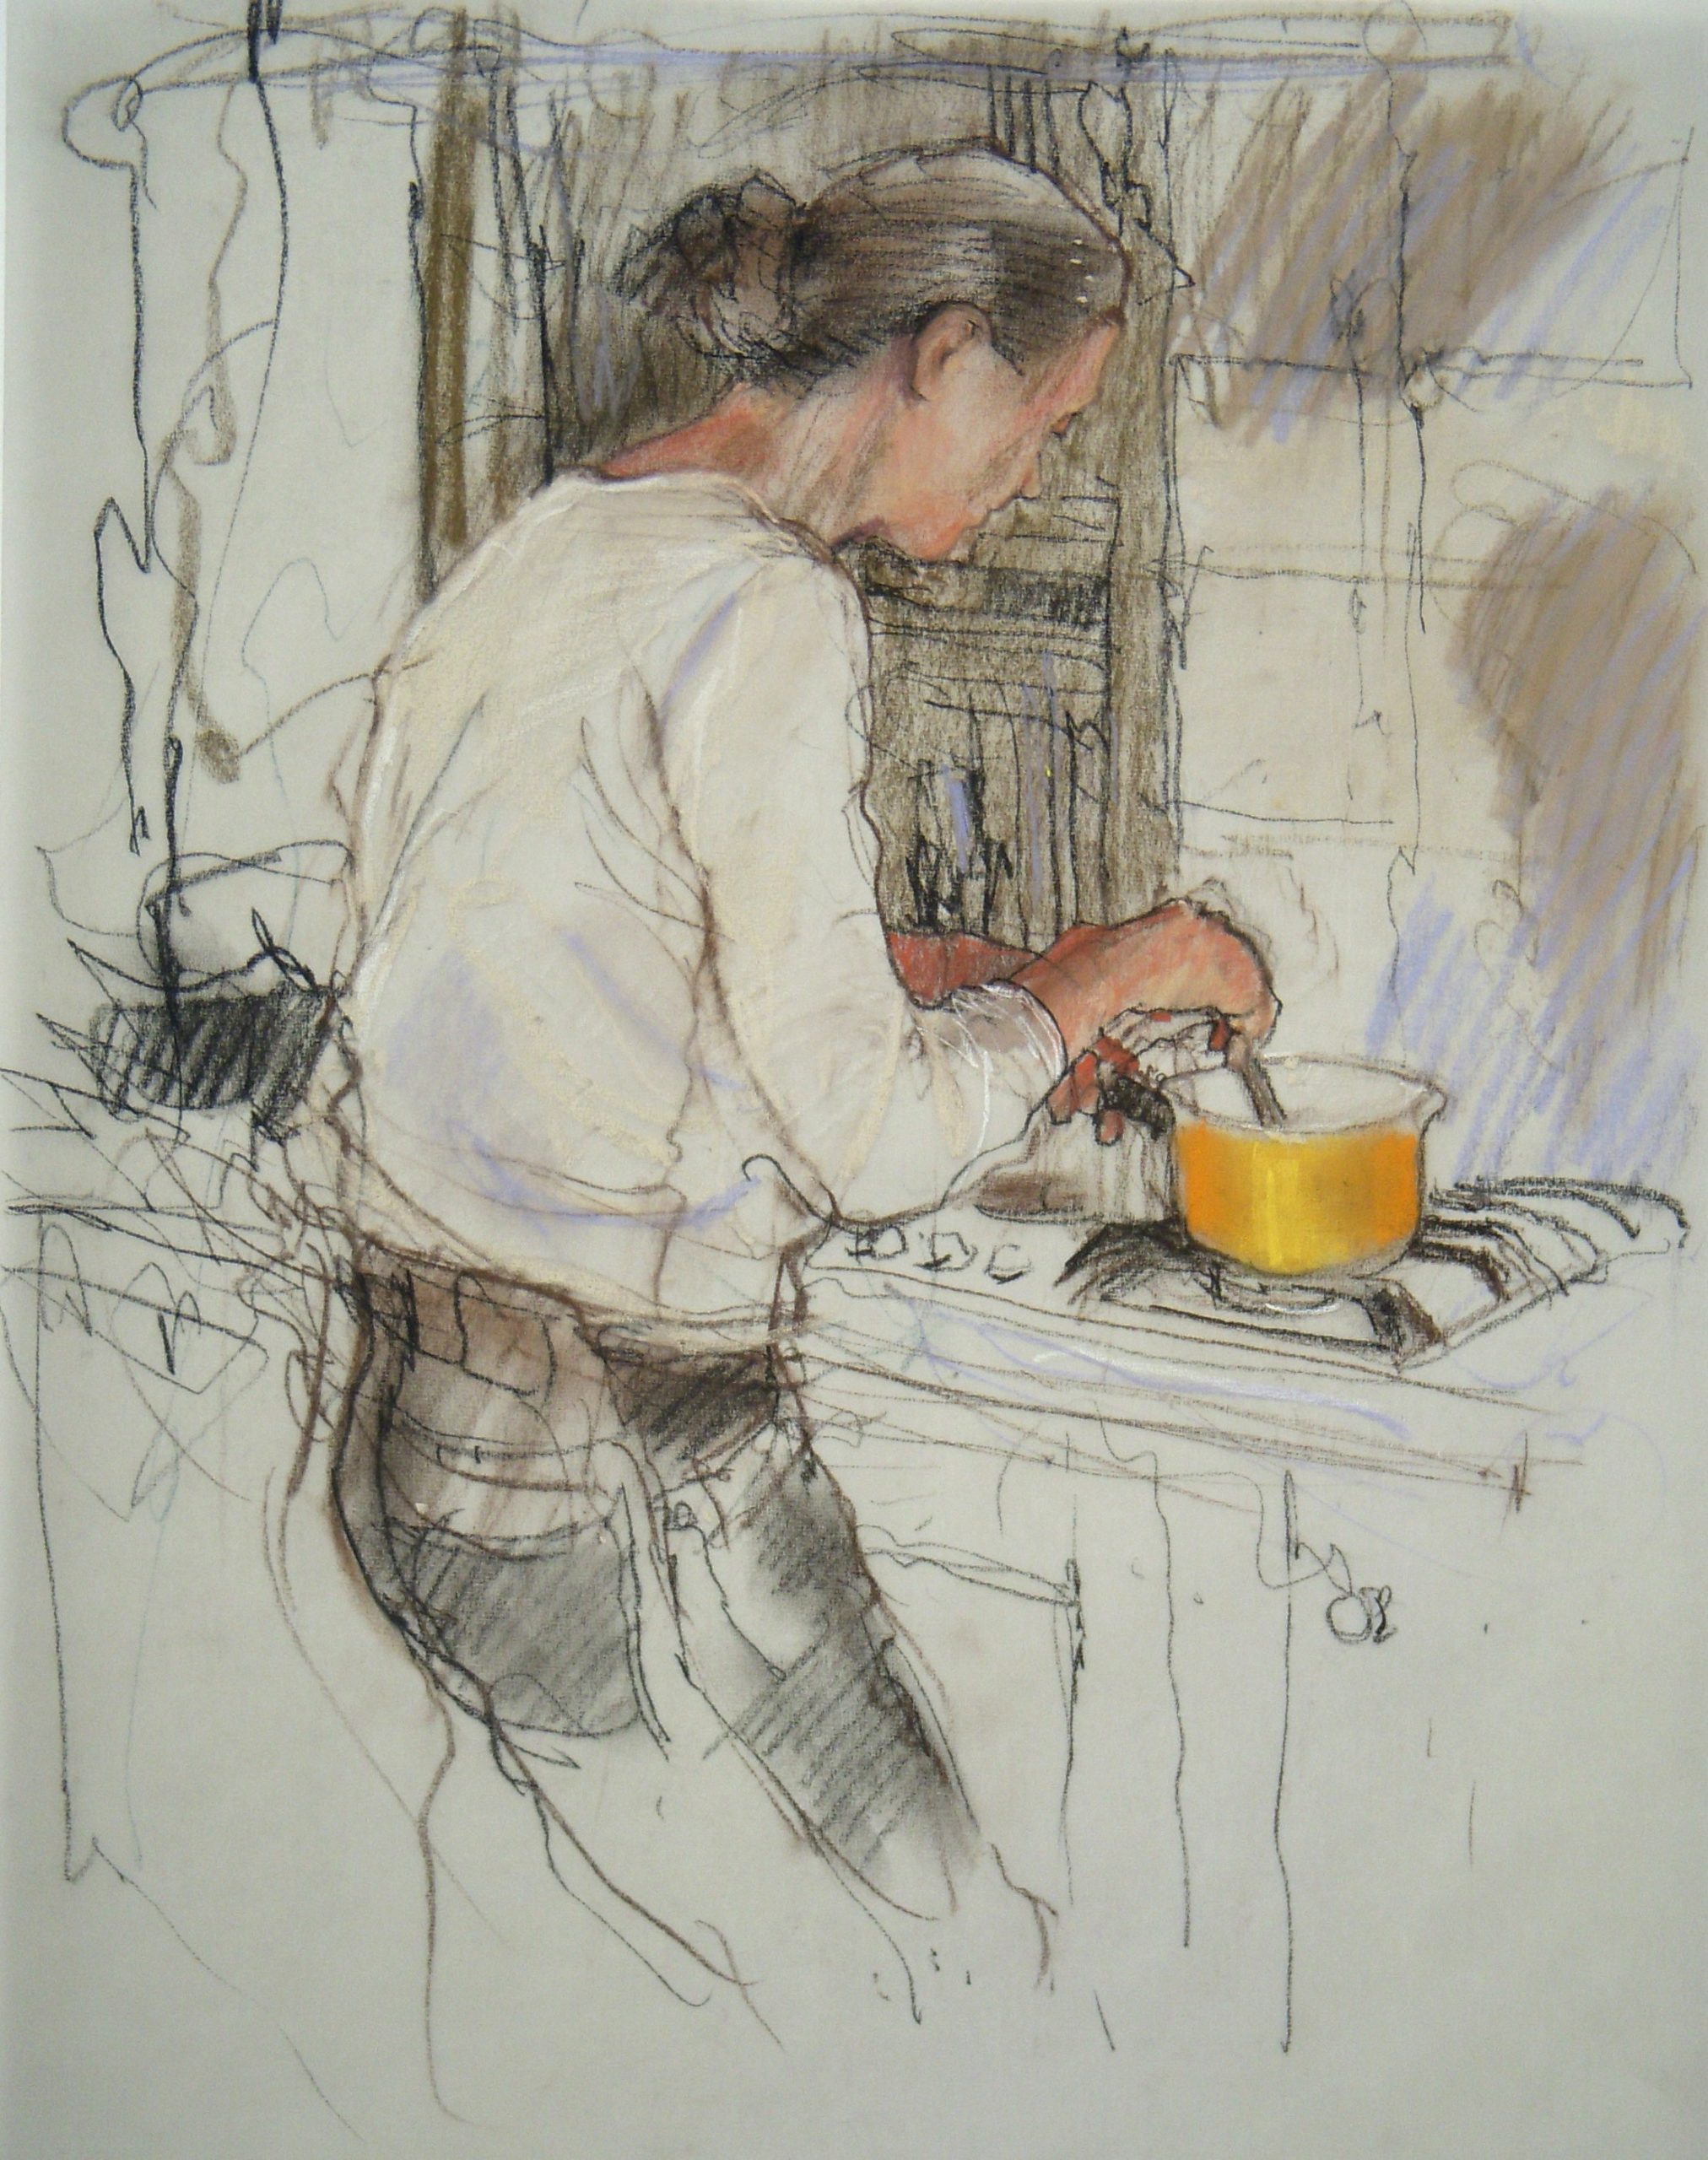 Colour of paper: Felicity House, "The Yellow Saucepan," pastel and soft charcoal pencil, 30 x 22 cm (12 x 8 in). Use pale paper when the drawn line is important 